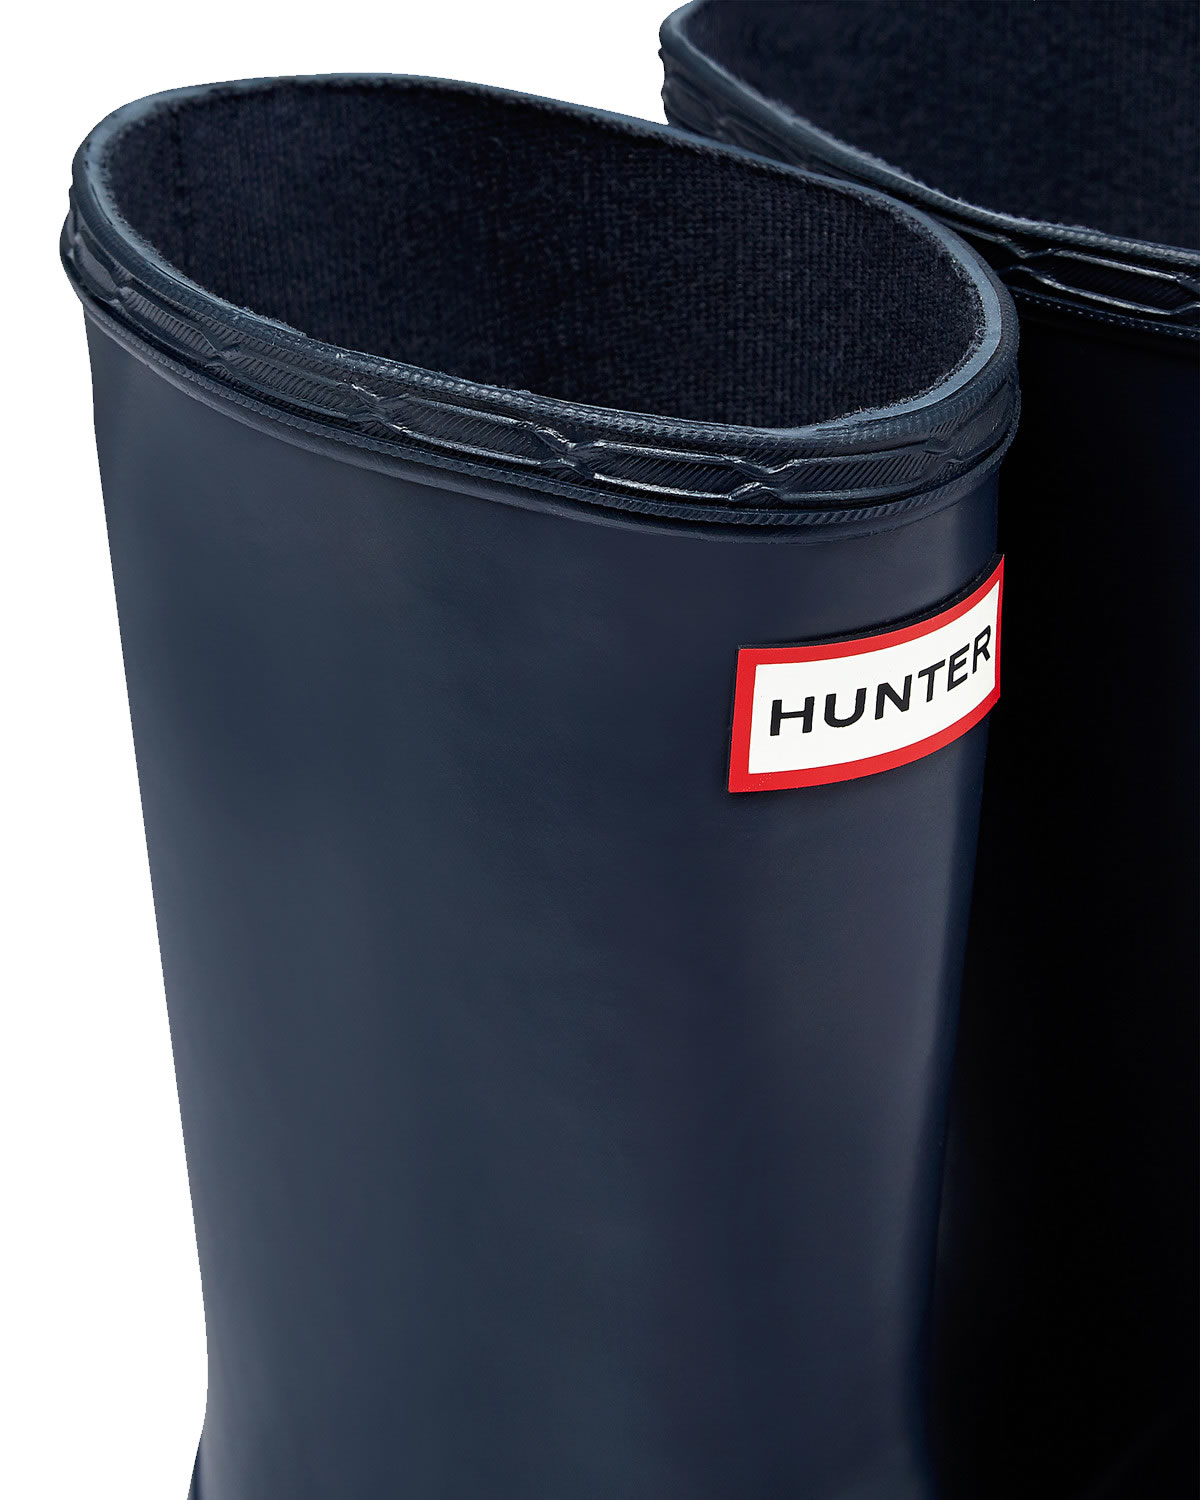 Extra image of Kids First Hunter Wellies - Navy UK 4 INF (EURO 21)